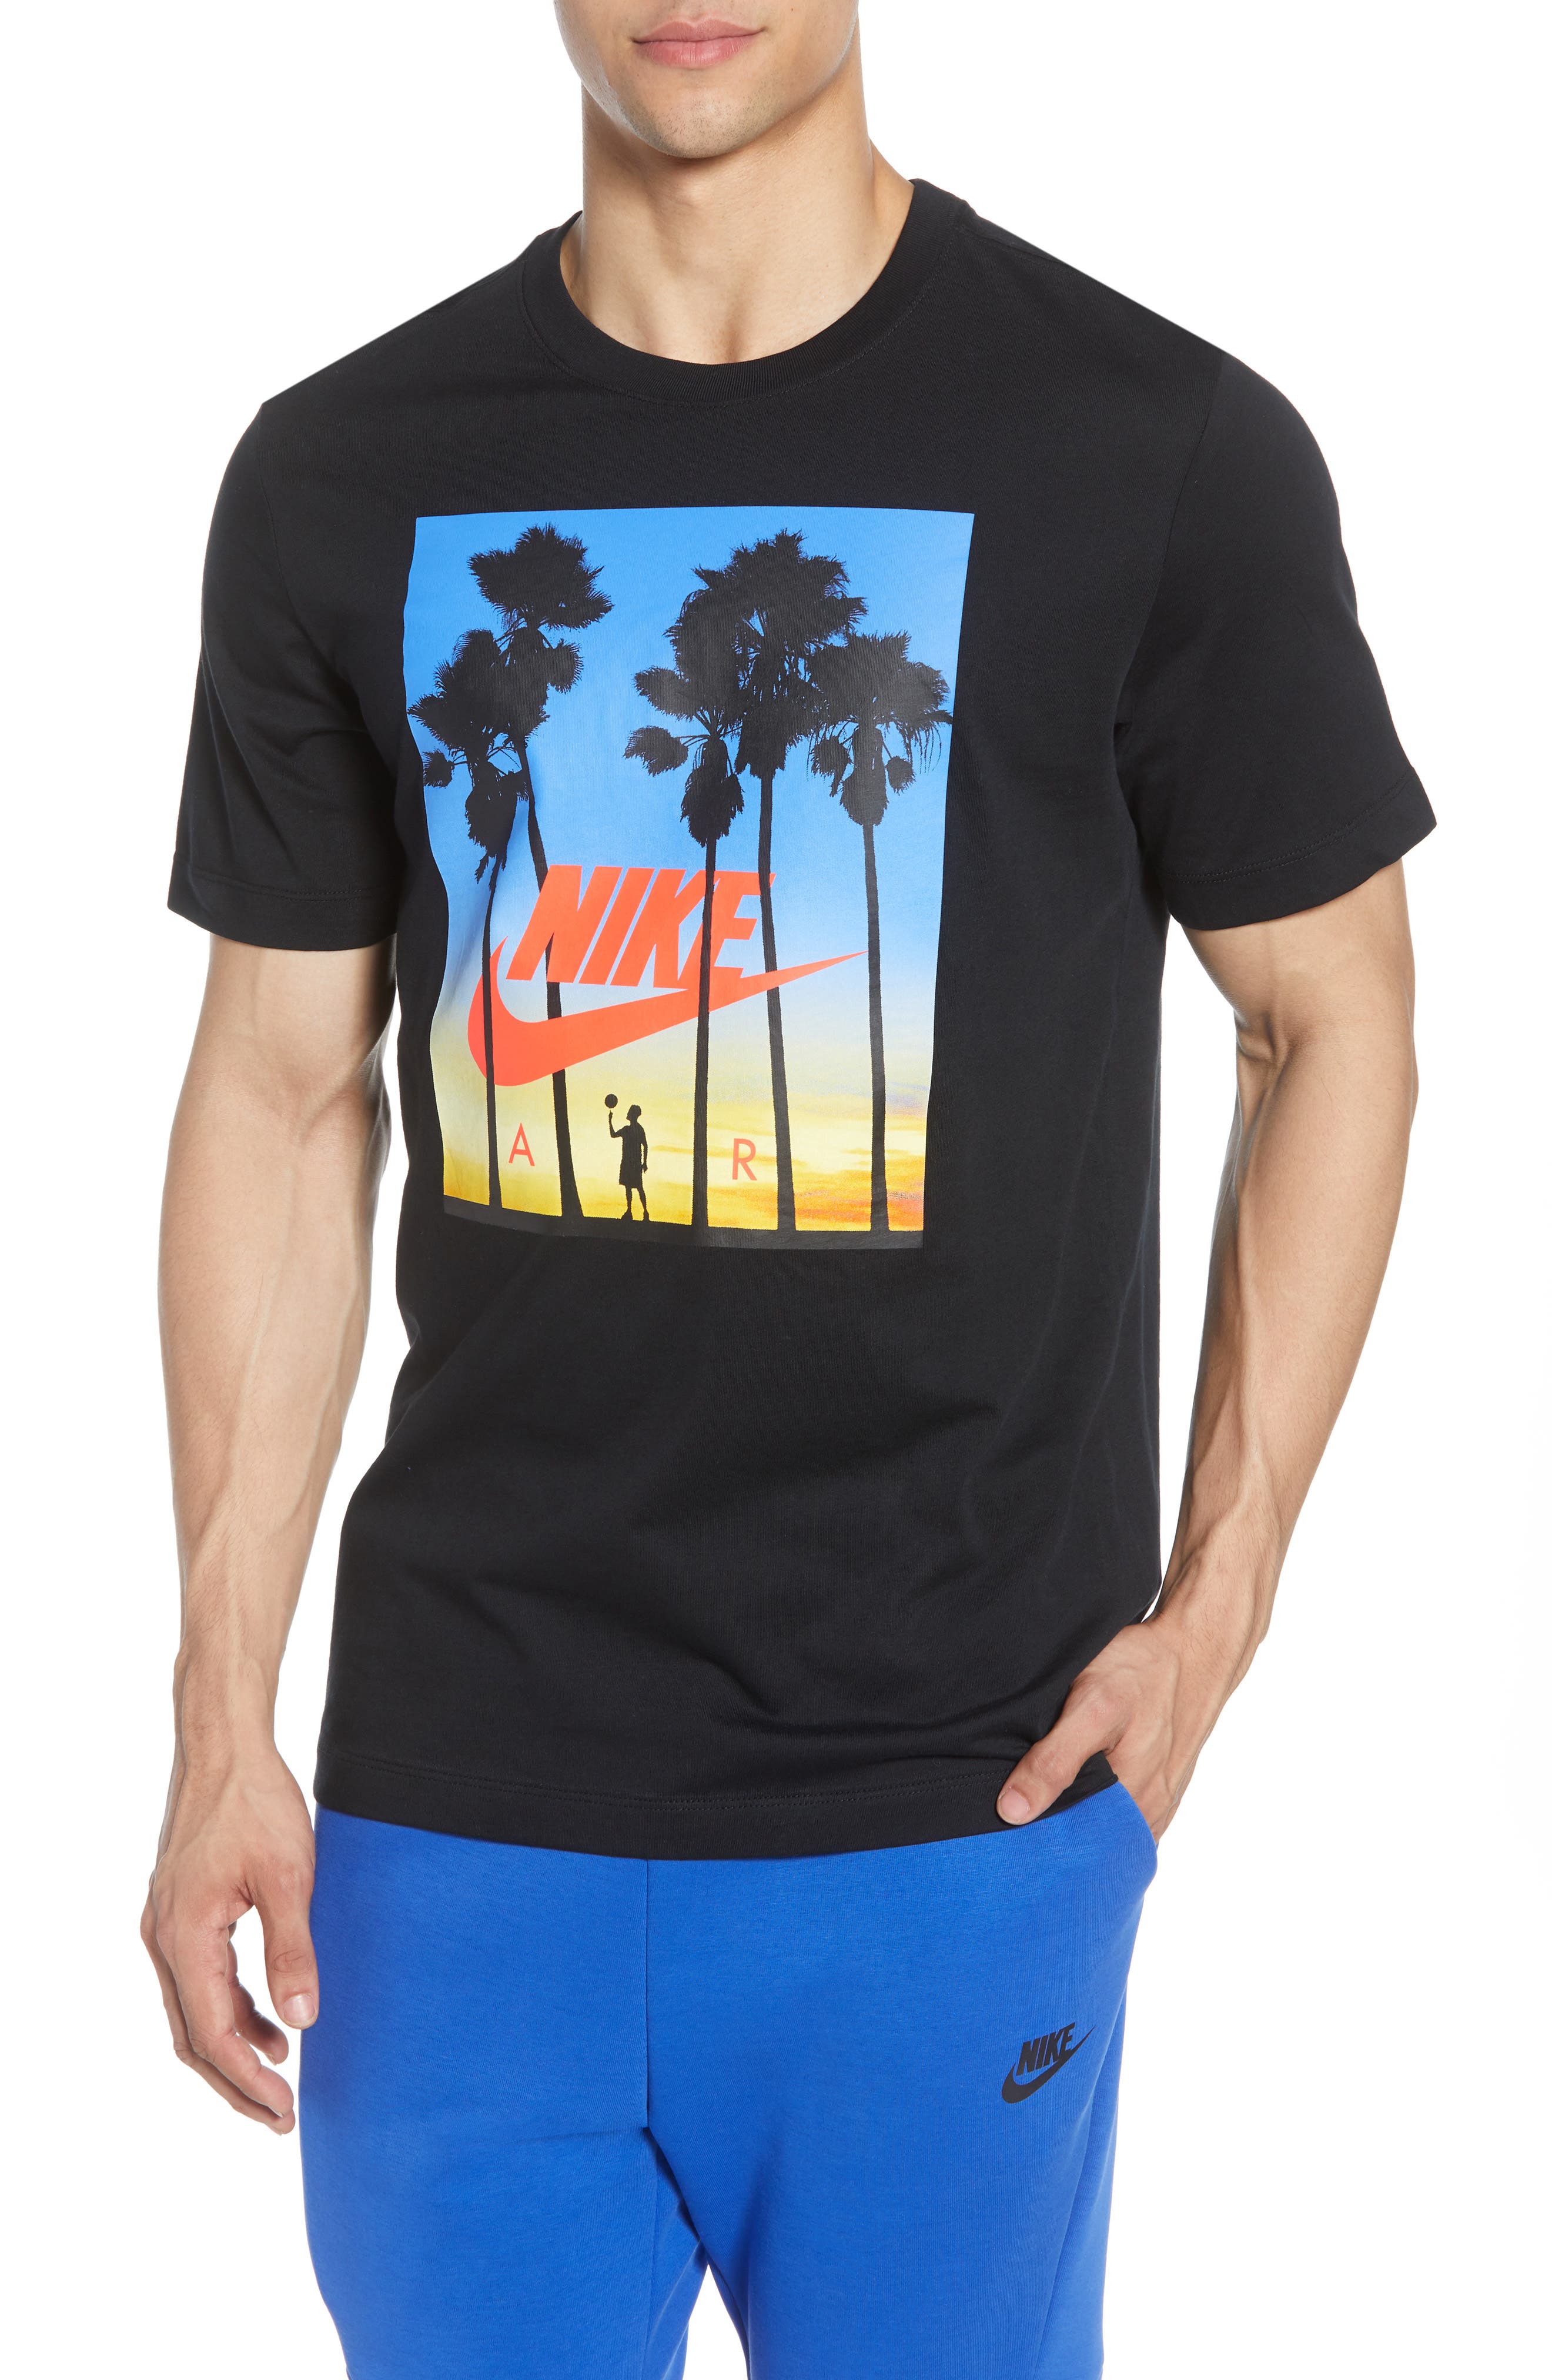 Nike Air 4 Graphic T-Shirt | Nordstrom